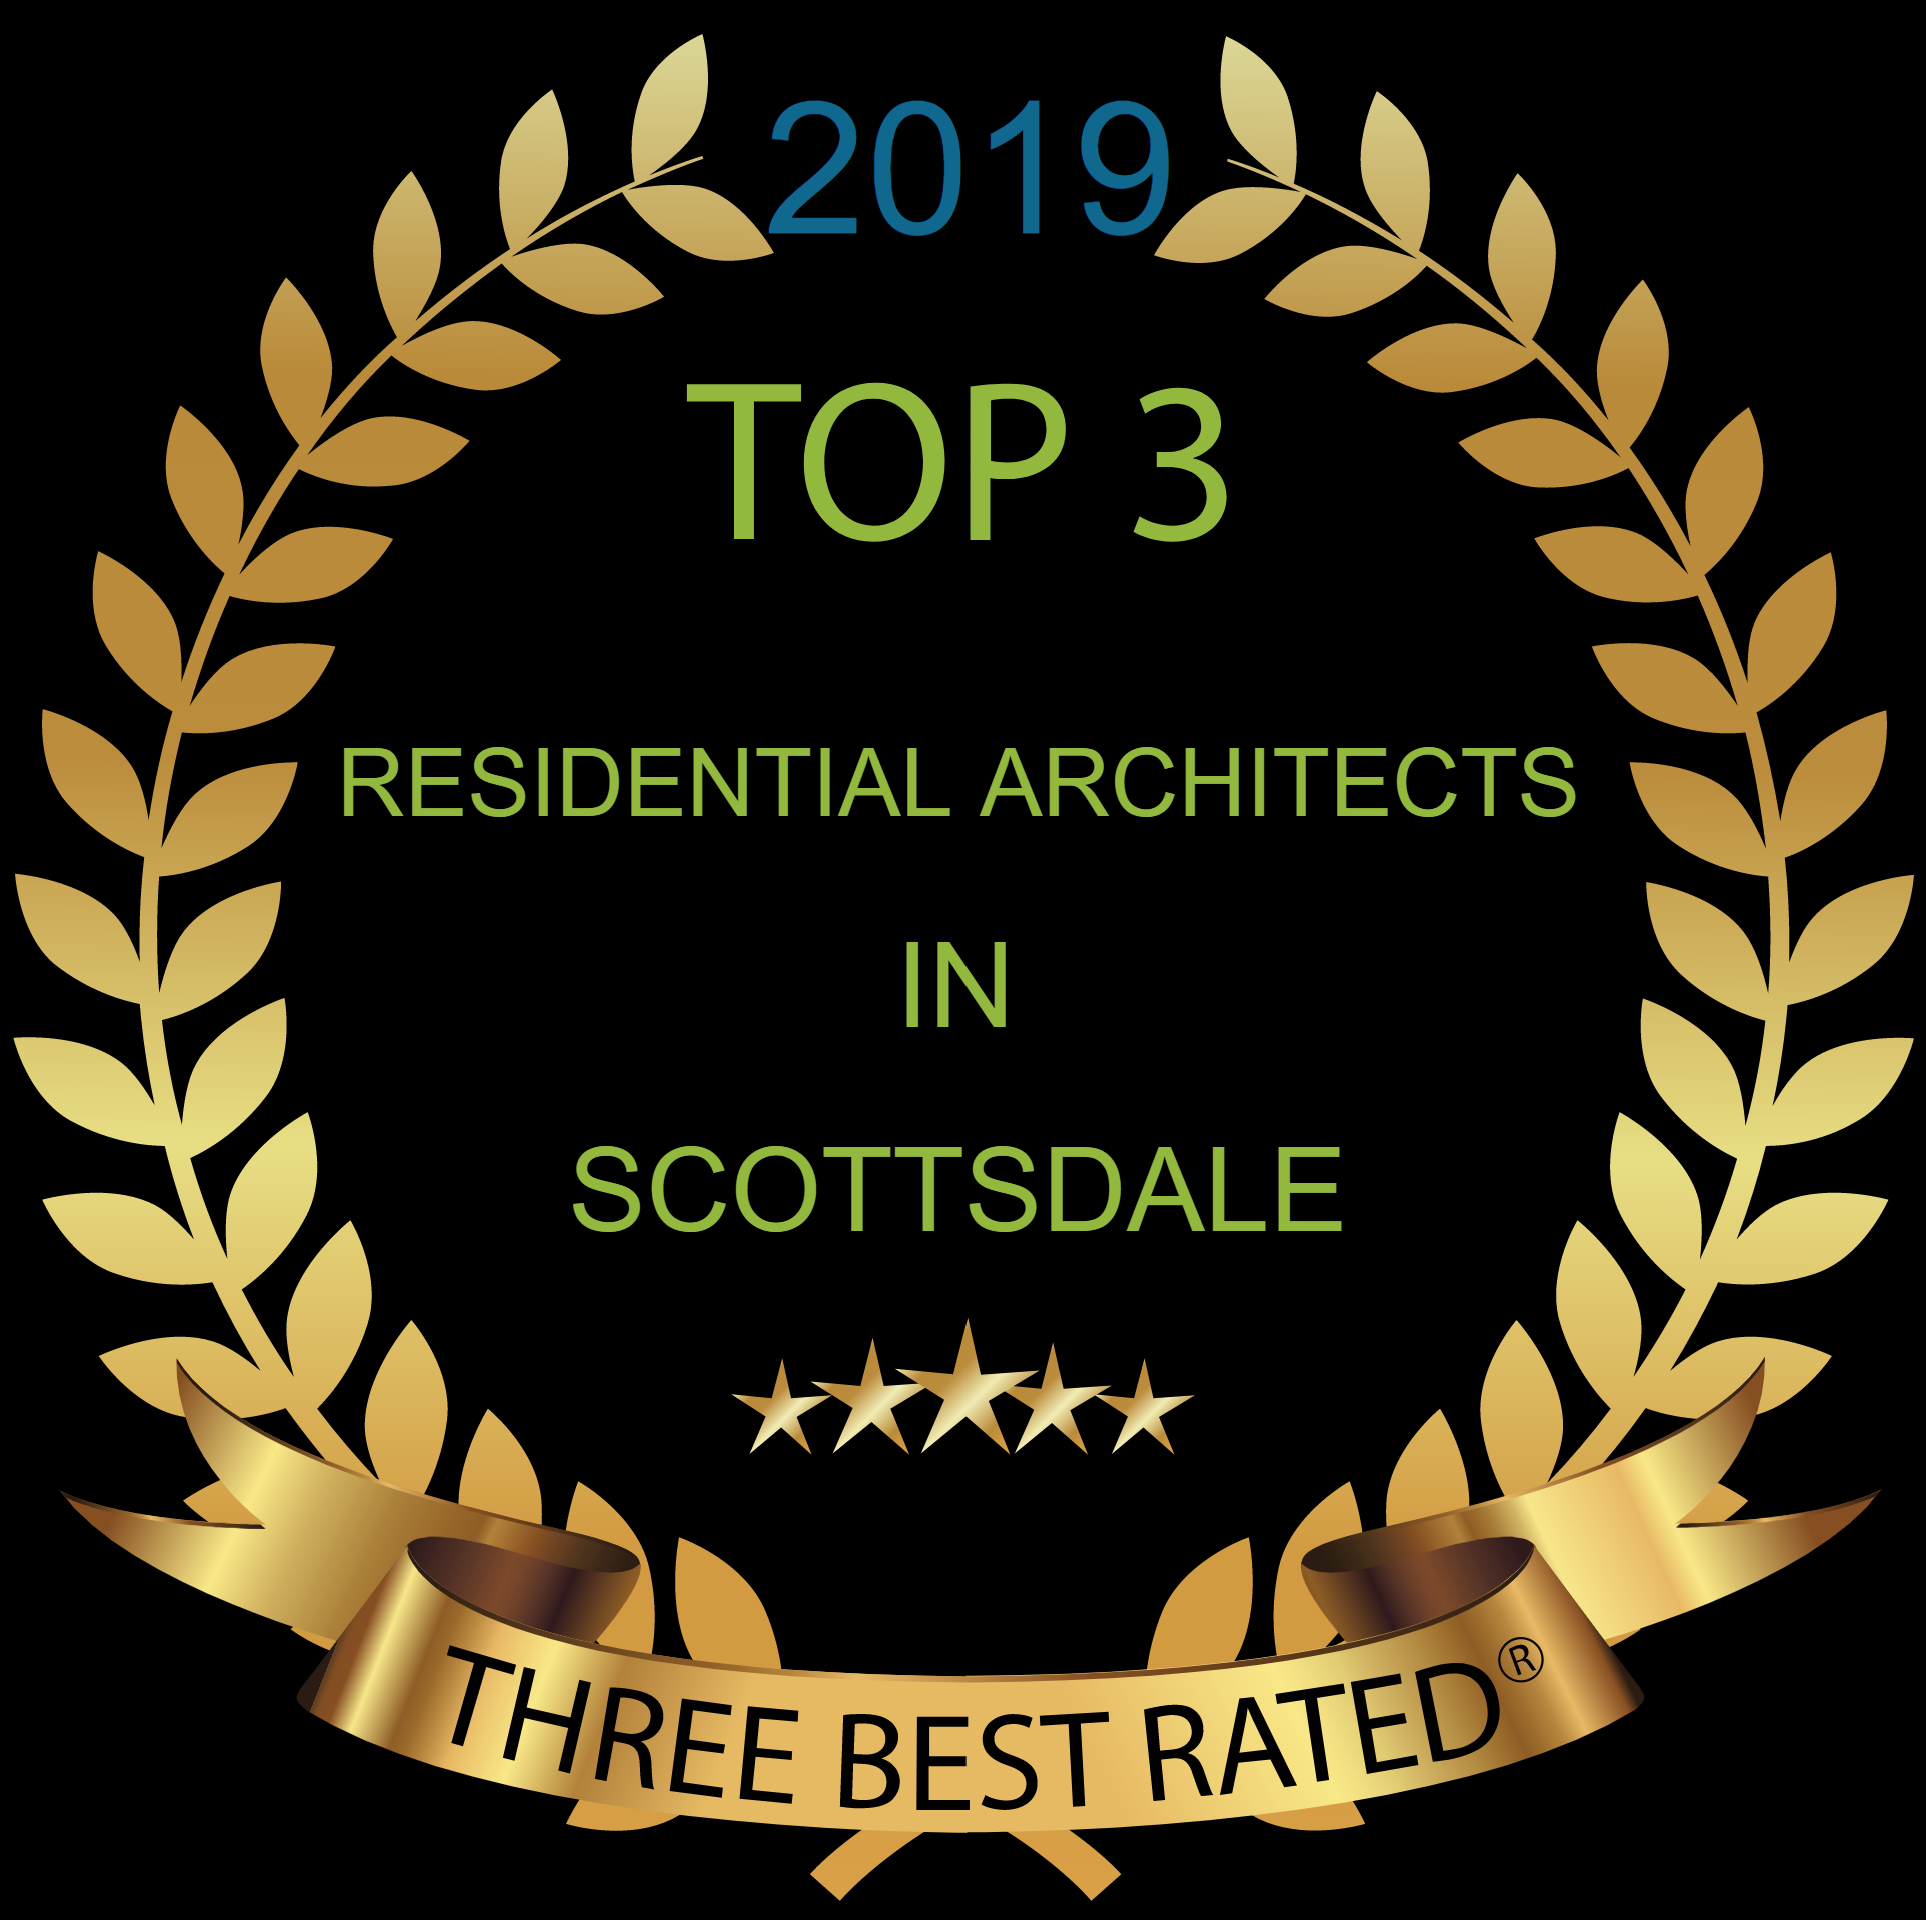 Best rated architects in Scottsdale